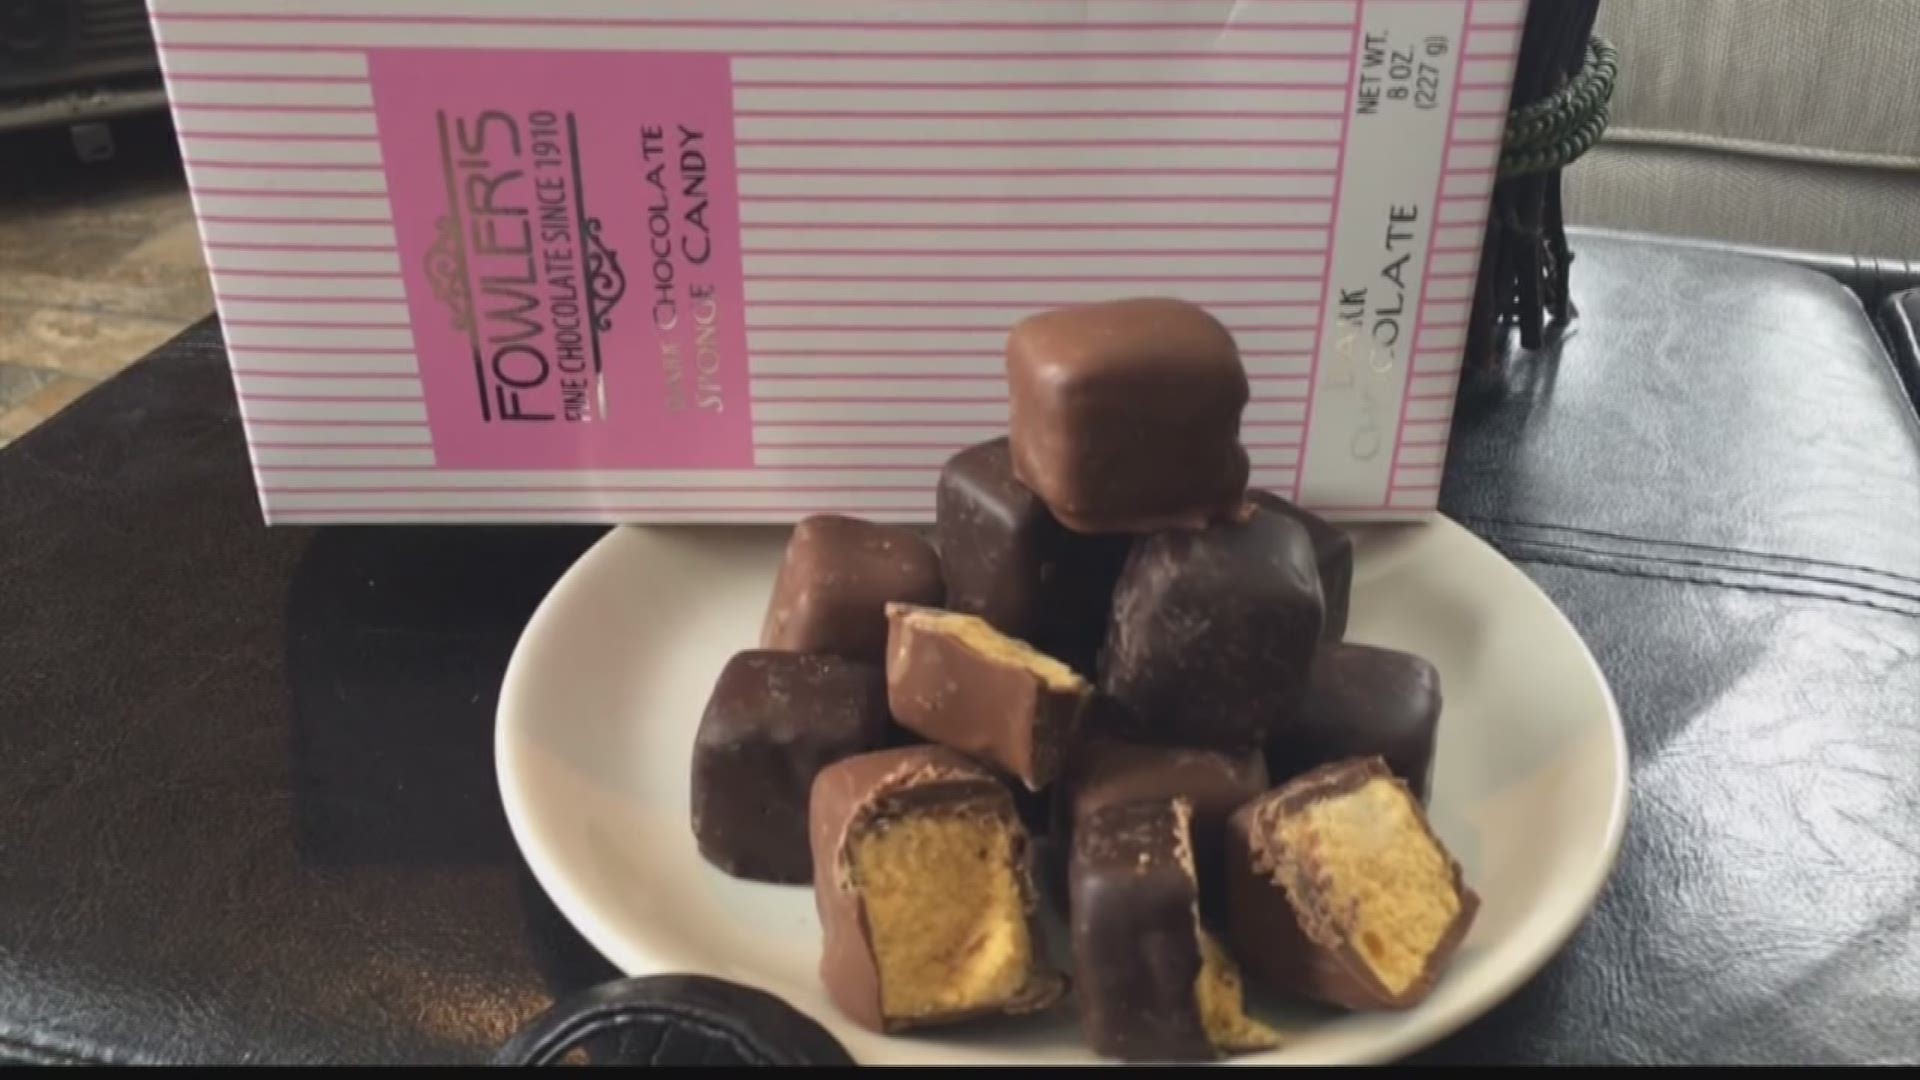 Deal Guy Matt Granite has a sweet deal on Fowler's Sponge Candy just in time for Easter.